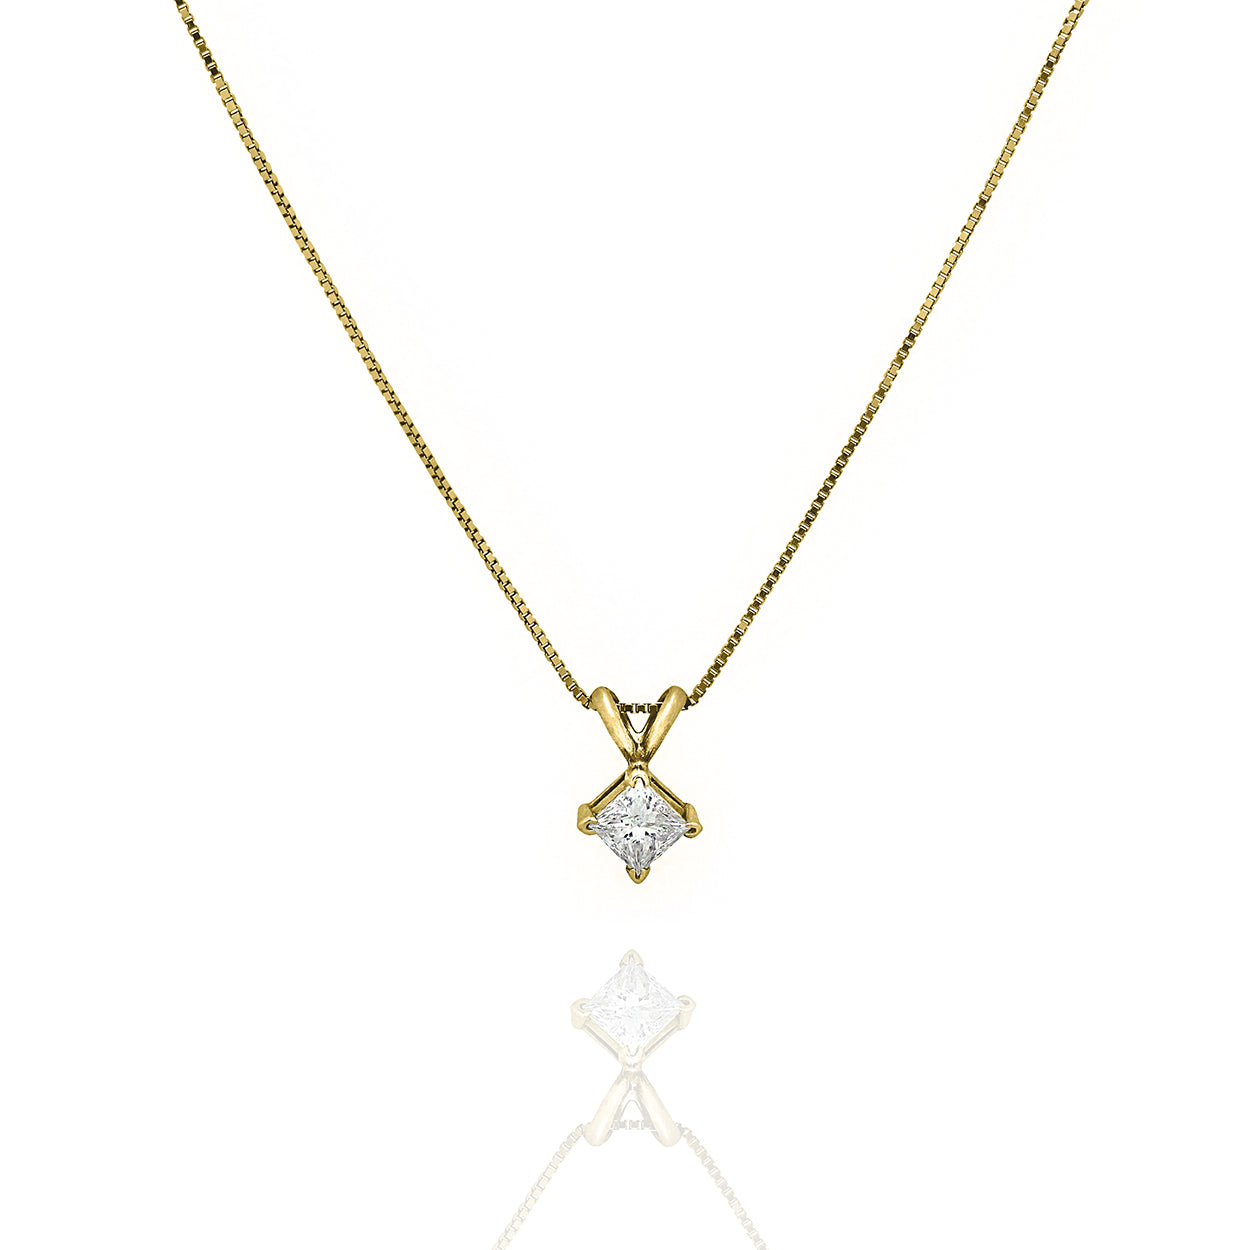 14KT Yellow Gold 0.48CTW Princess Cut Diamond Necklace with Box Chain